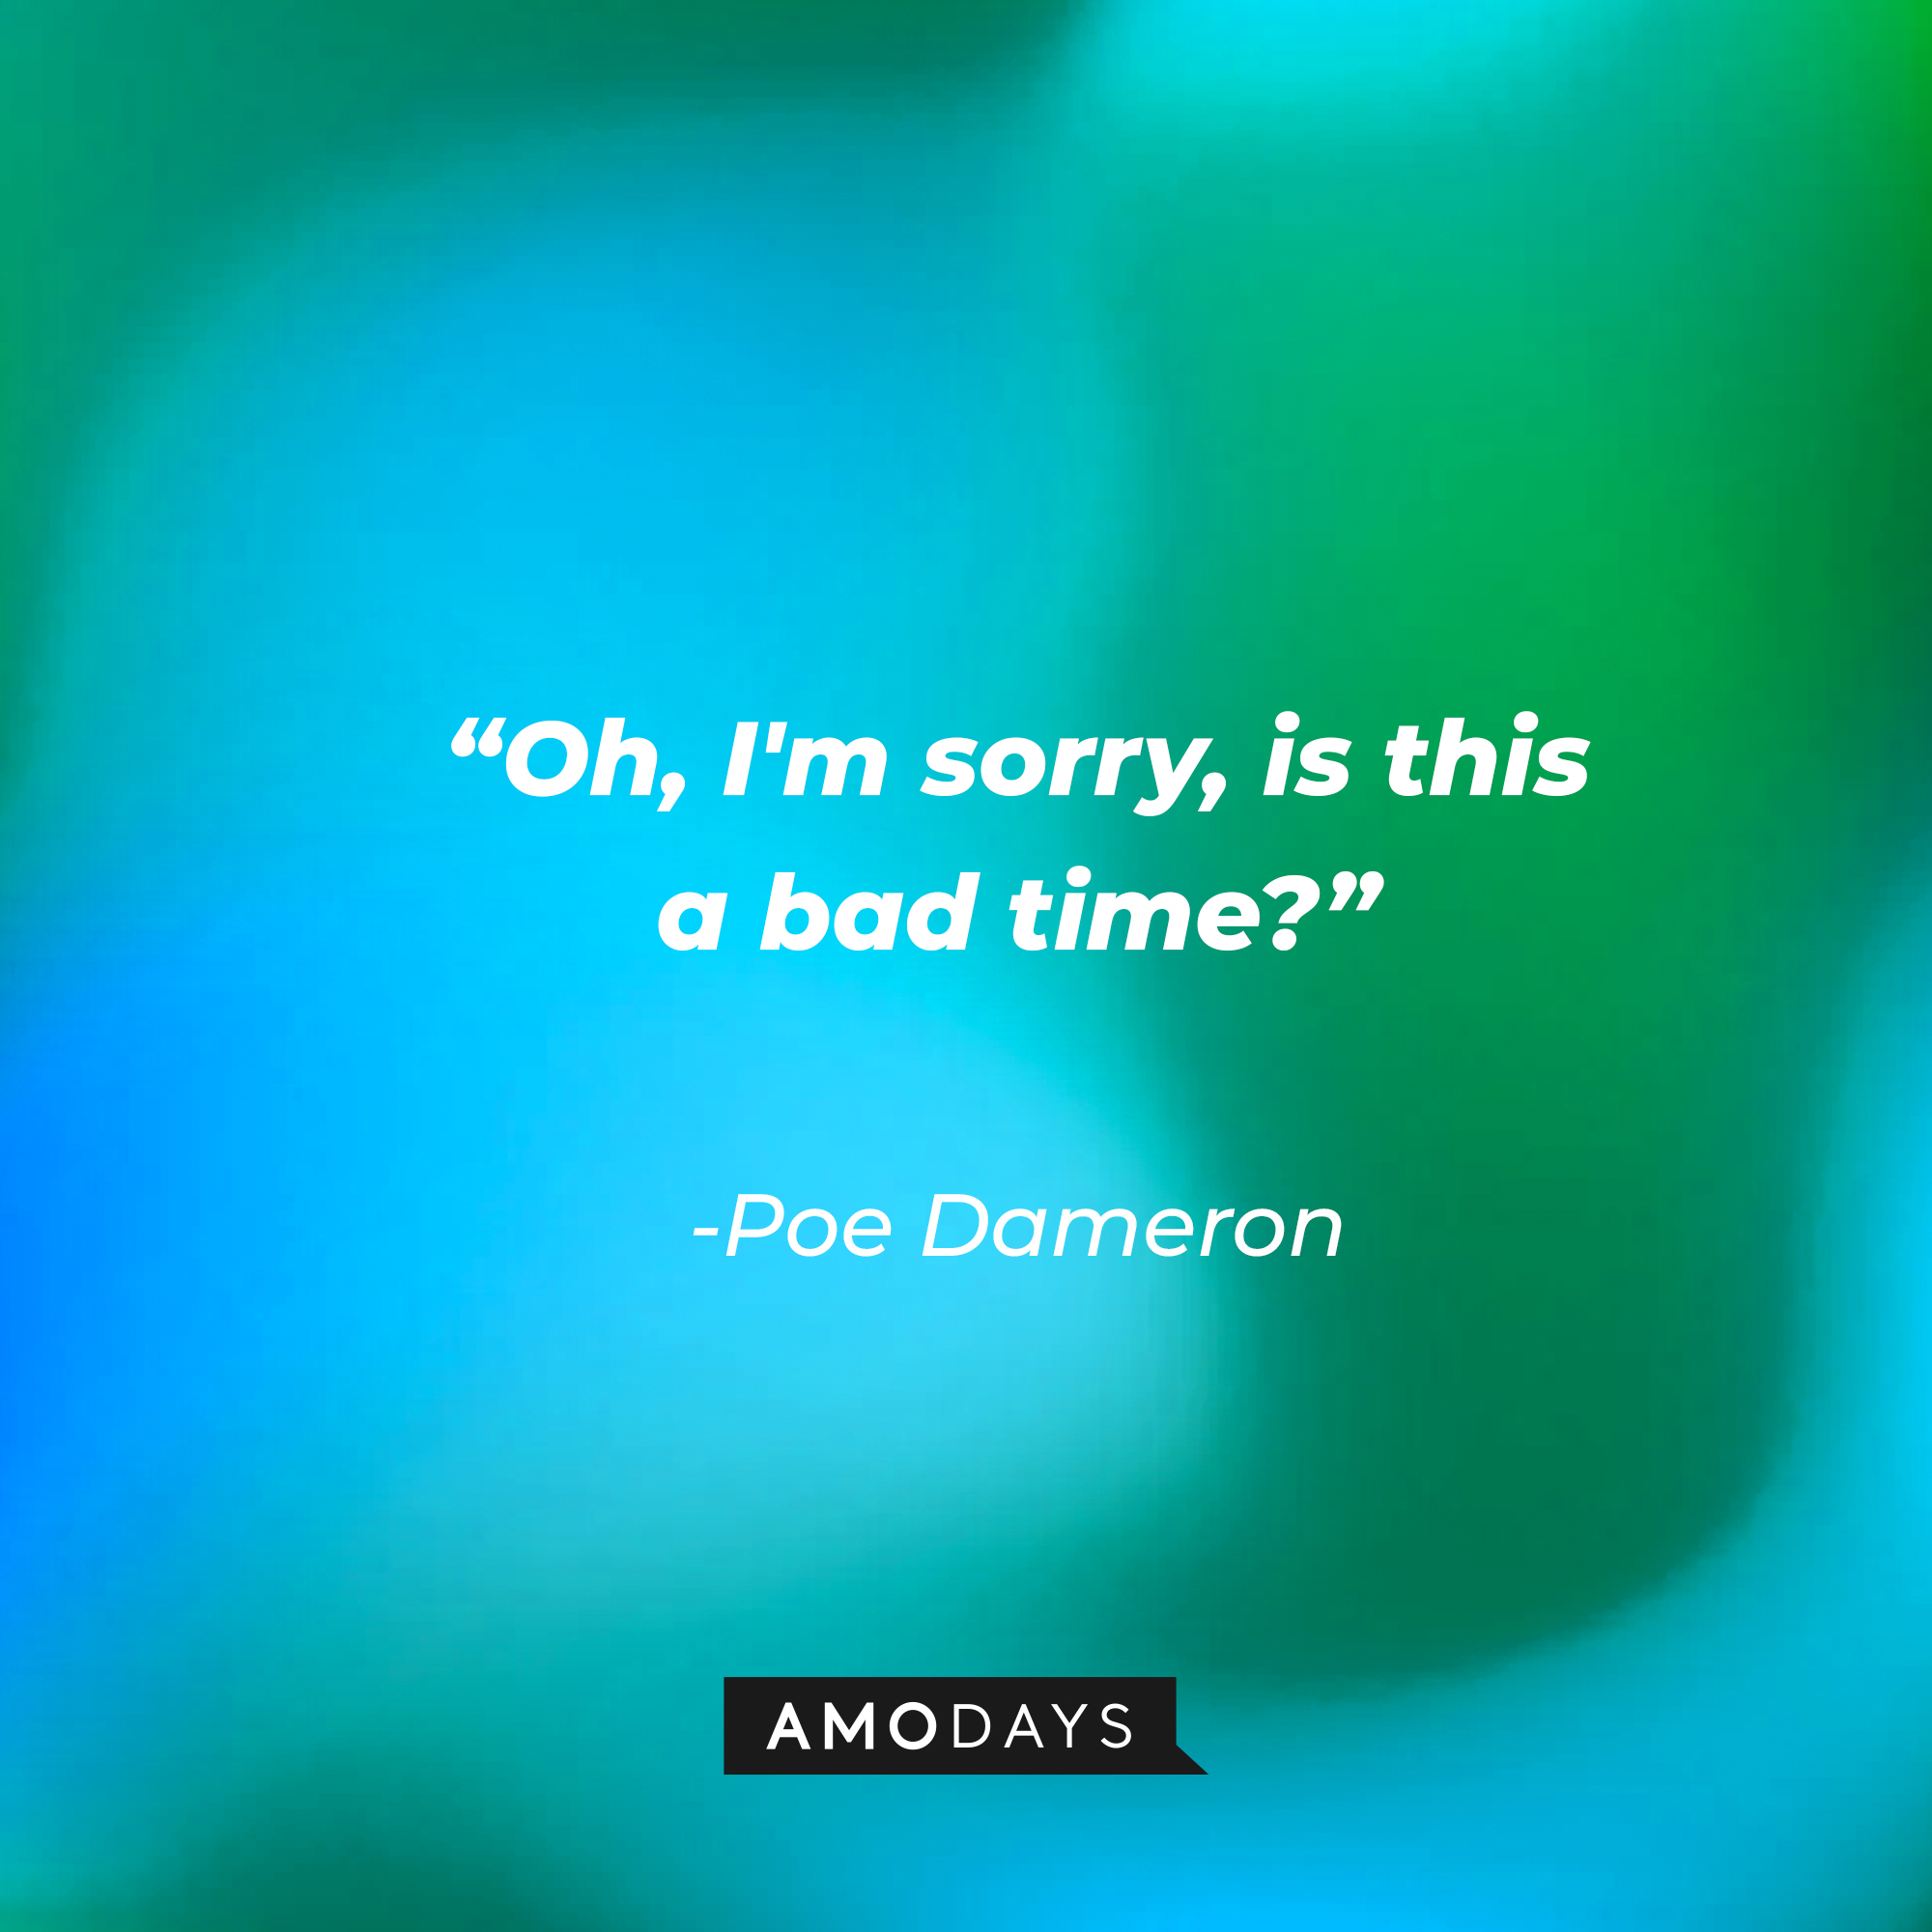 Poe Dameron’s quote: “Oh, I'm sorry, is this a bad time?”  | Source: AmoDays